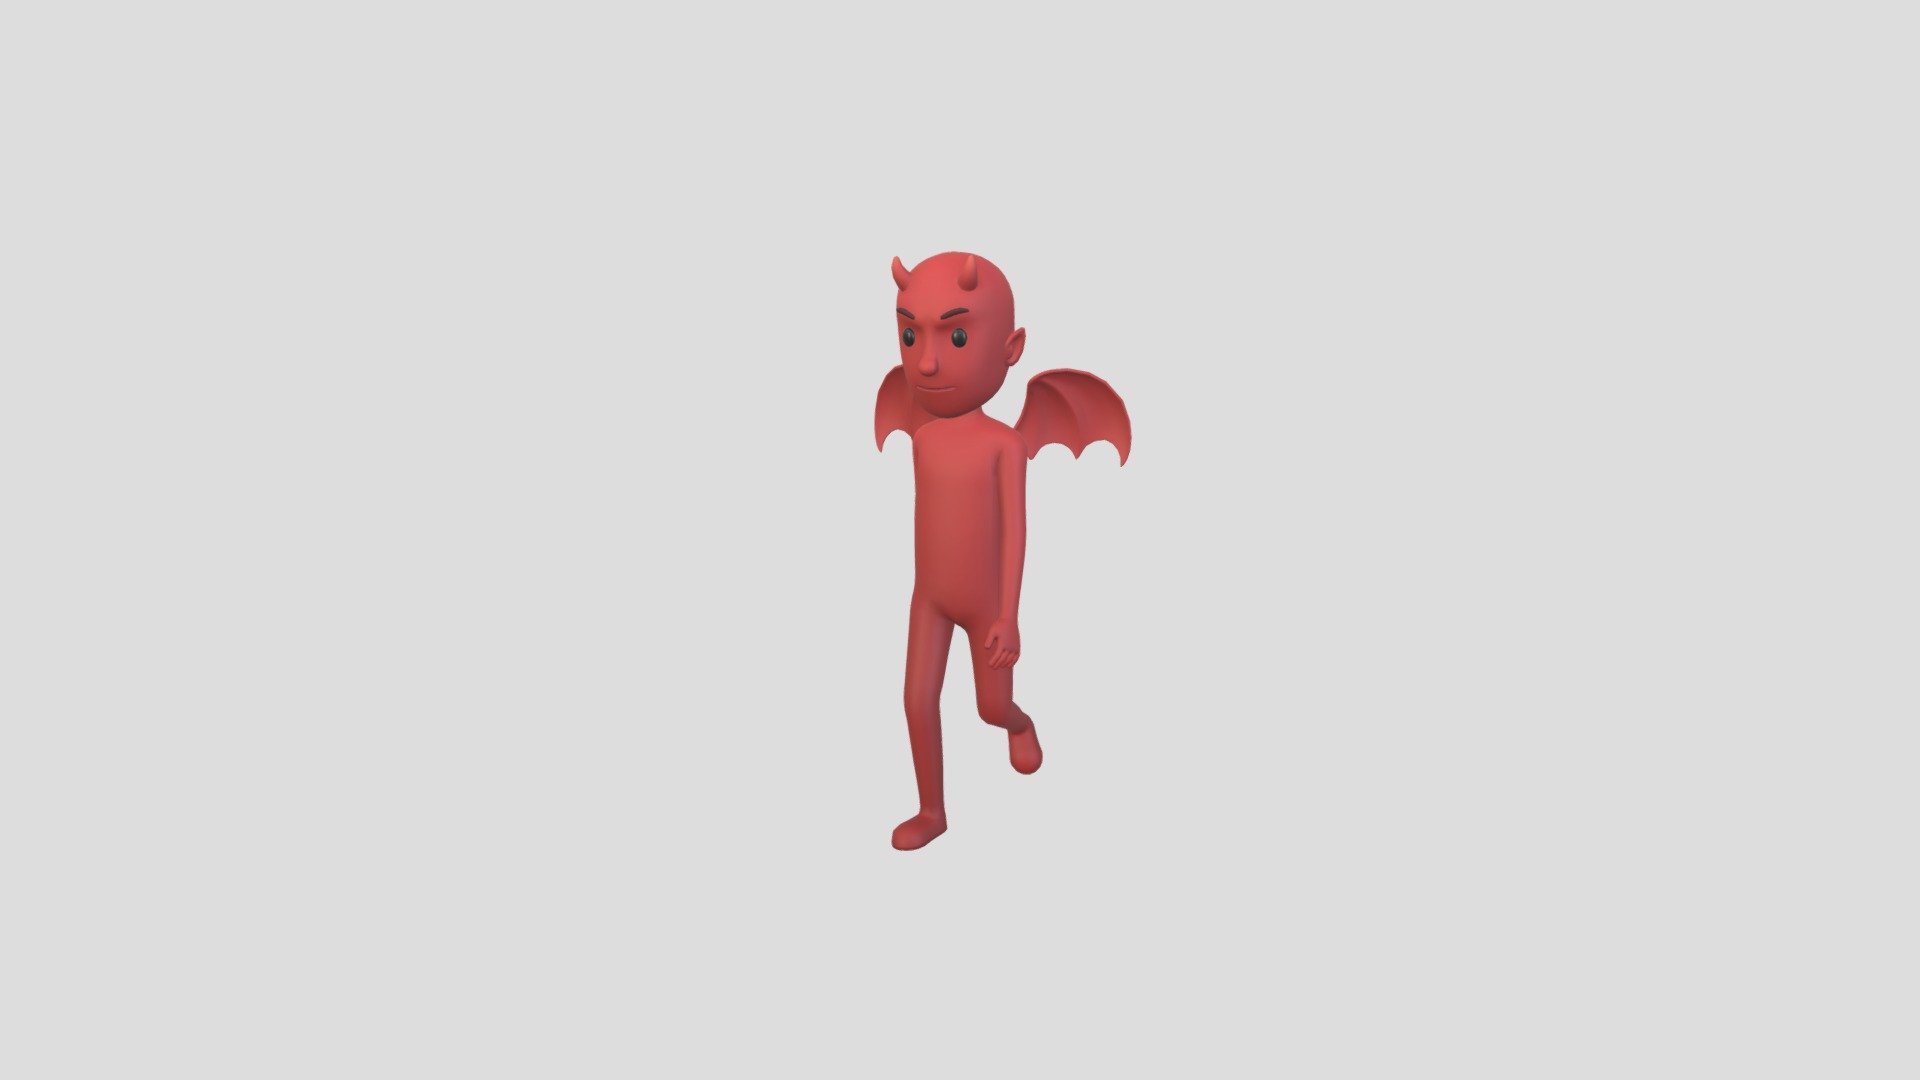 Rig Devil Character 3d model.      
    


File Format      
 
- 3ds max 2022  
 
- FBX  
 
- OBJ  
    


Clean topology    

Rig with CAT in 3ds Max                          

Bone and Weight skin are in fbx file       

No Facial Rig    

No Animation    

Non-overlapping unwrapped UVs        
 


PNG texture               

2048x2048                


- Base Color                        

- Normal                            

- Roughness                         



6,822 polygons                          

6,682 vertexs                          
 - Character150 Rigged Devil - Buy Royalty Free 3D model by BaluCG 3d model